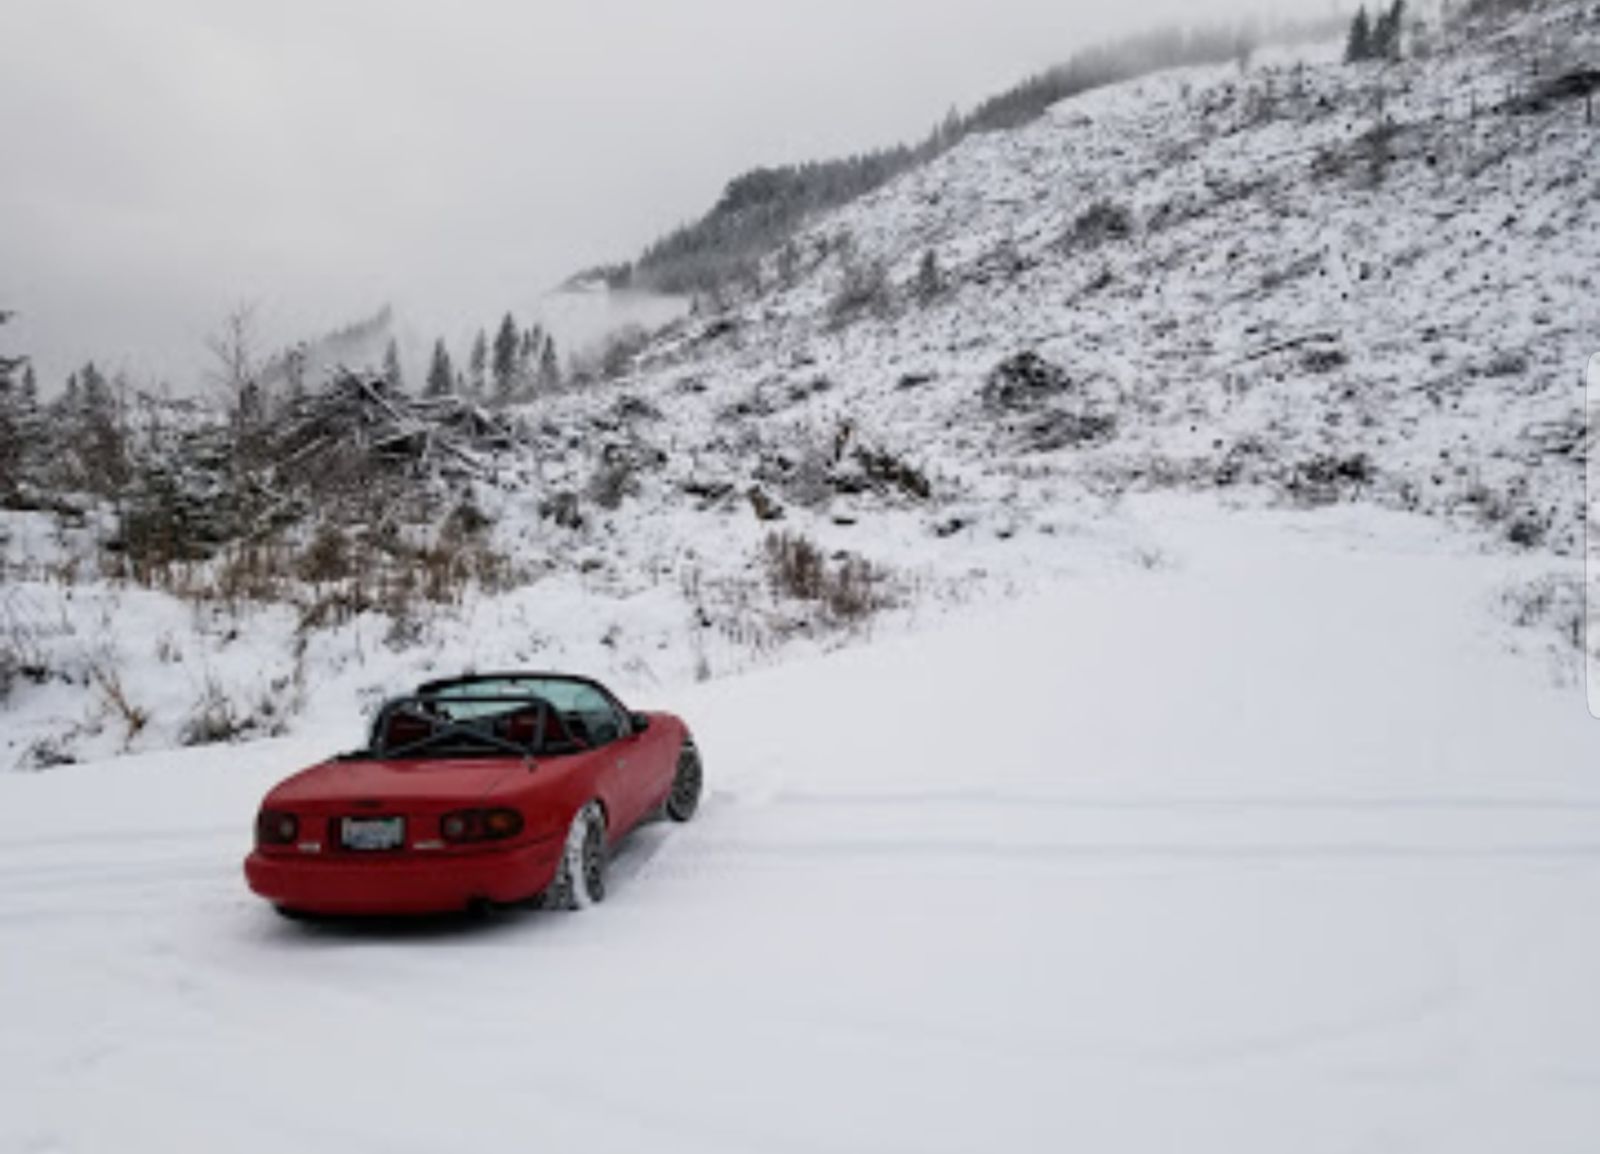 I had just gotten snow tires, and raised my suspension as high as it would go. With basically zero snow driving experience prior to this, I went for the full send